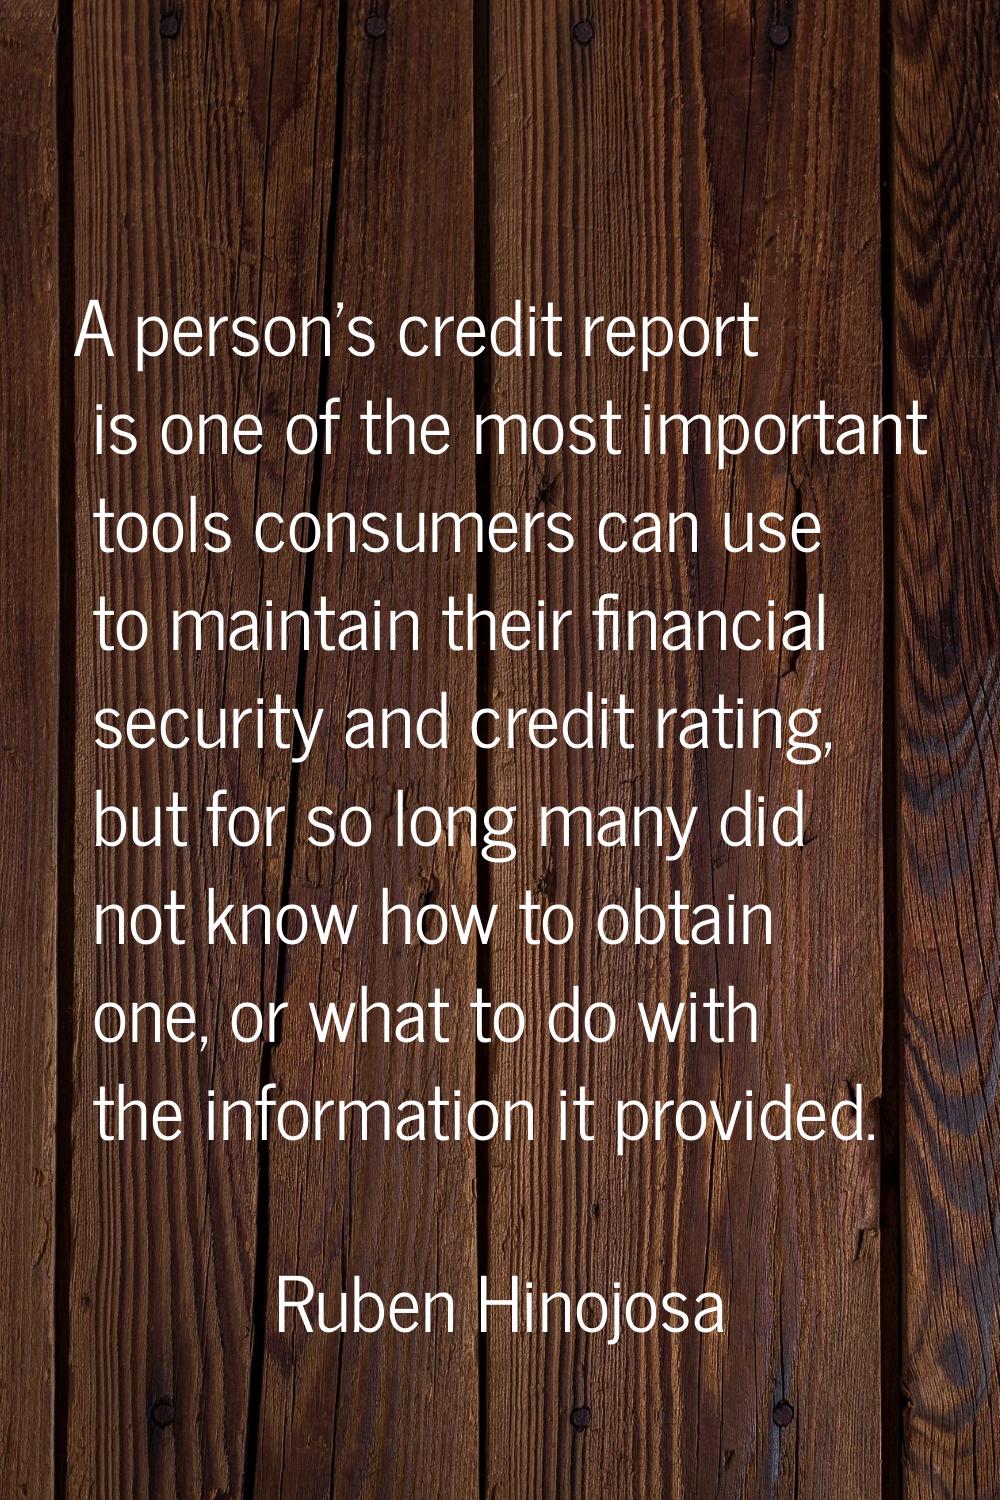 A person's credit report is one of the most important tools consumers can use to maintain their fin